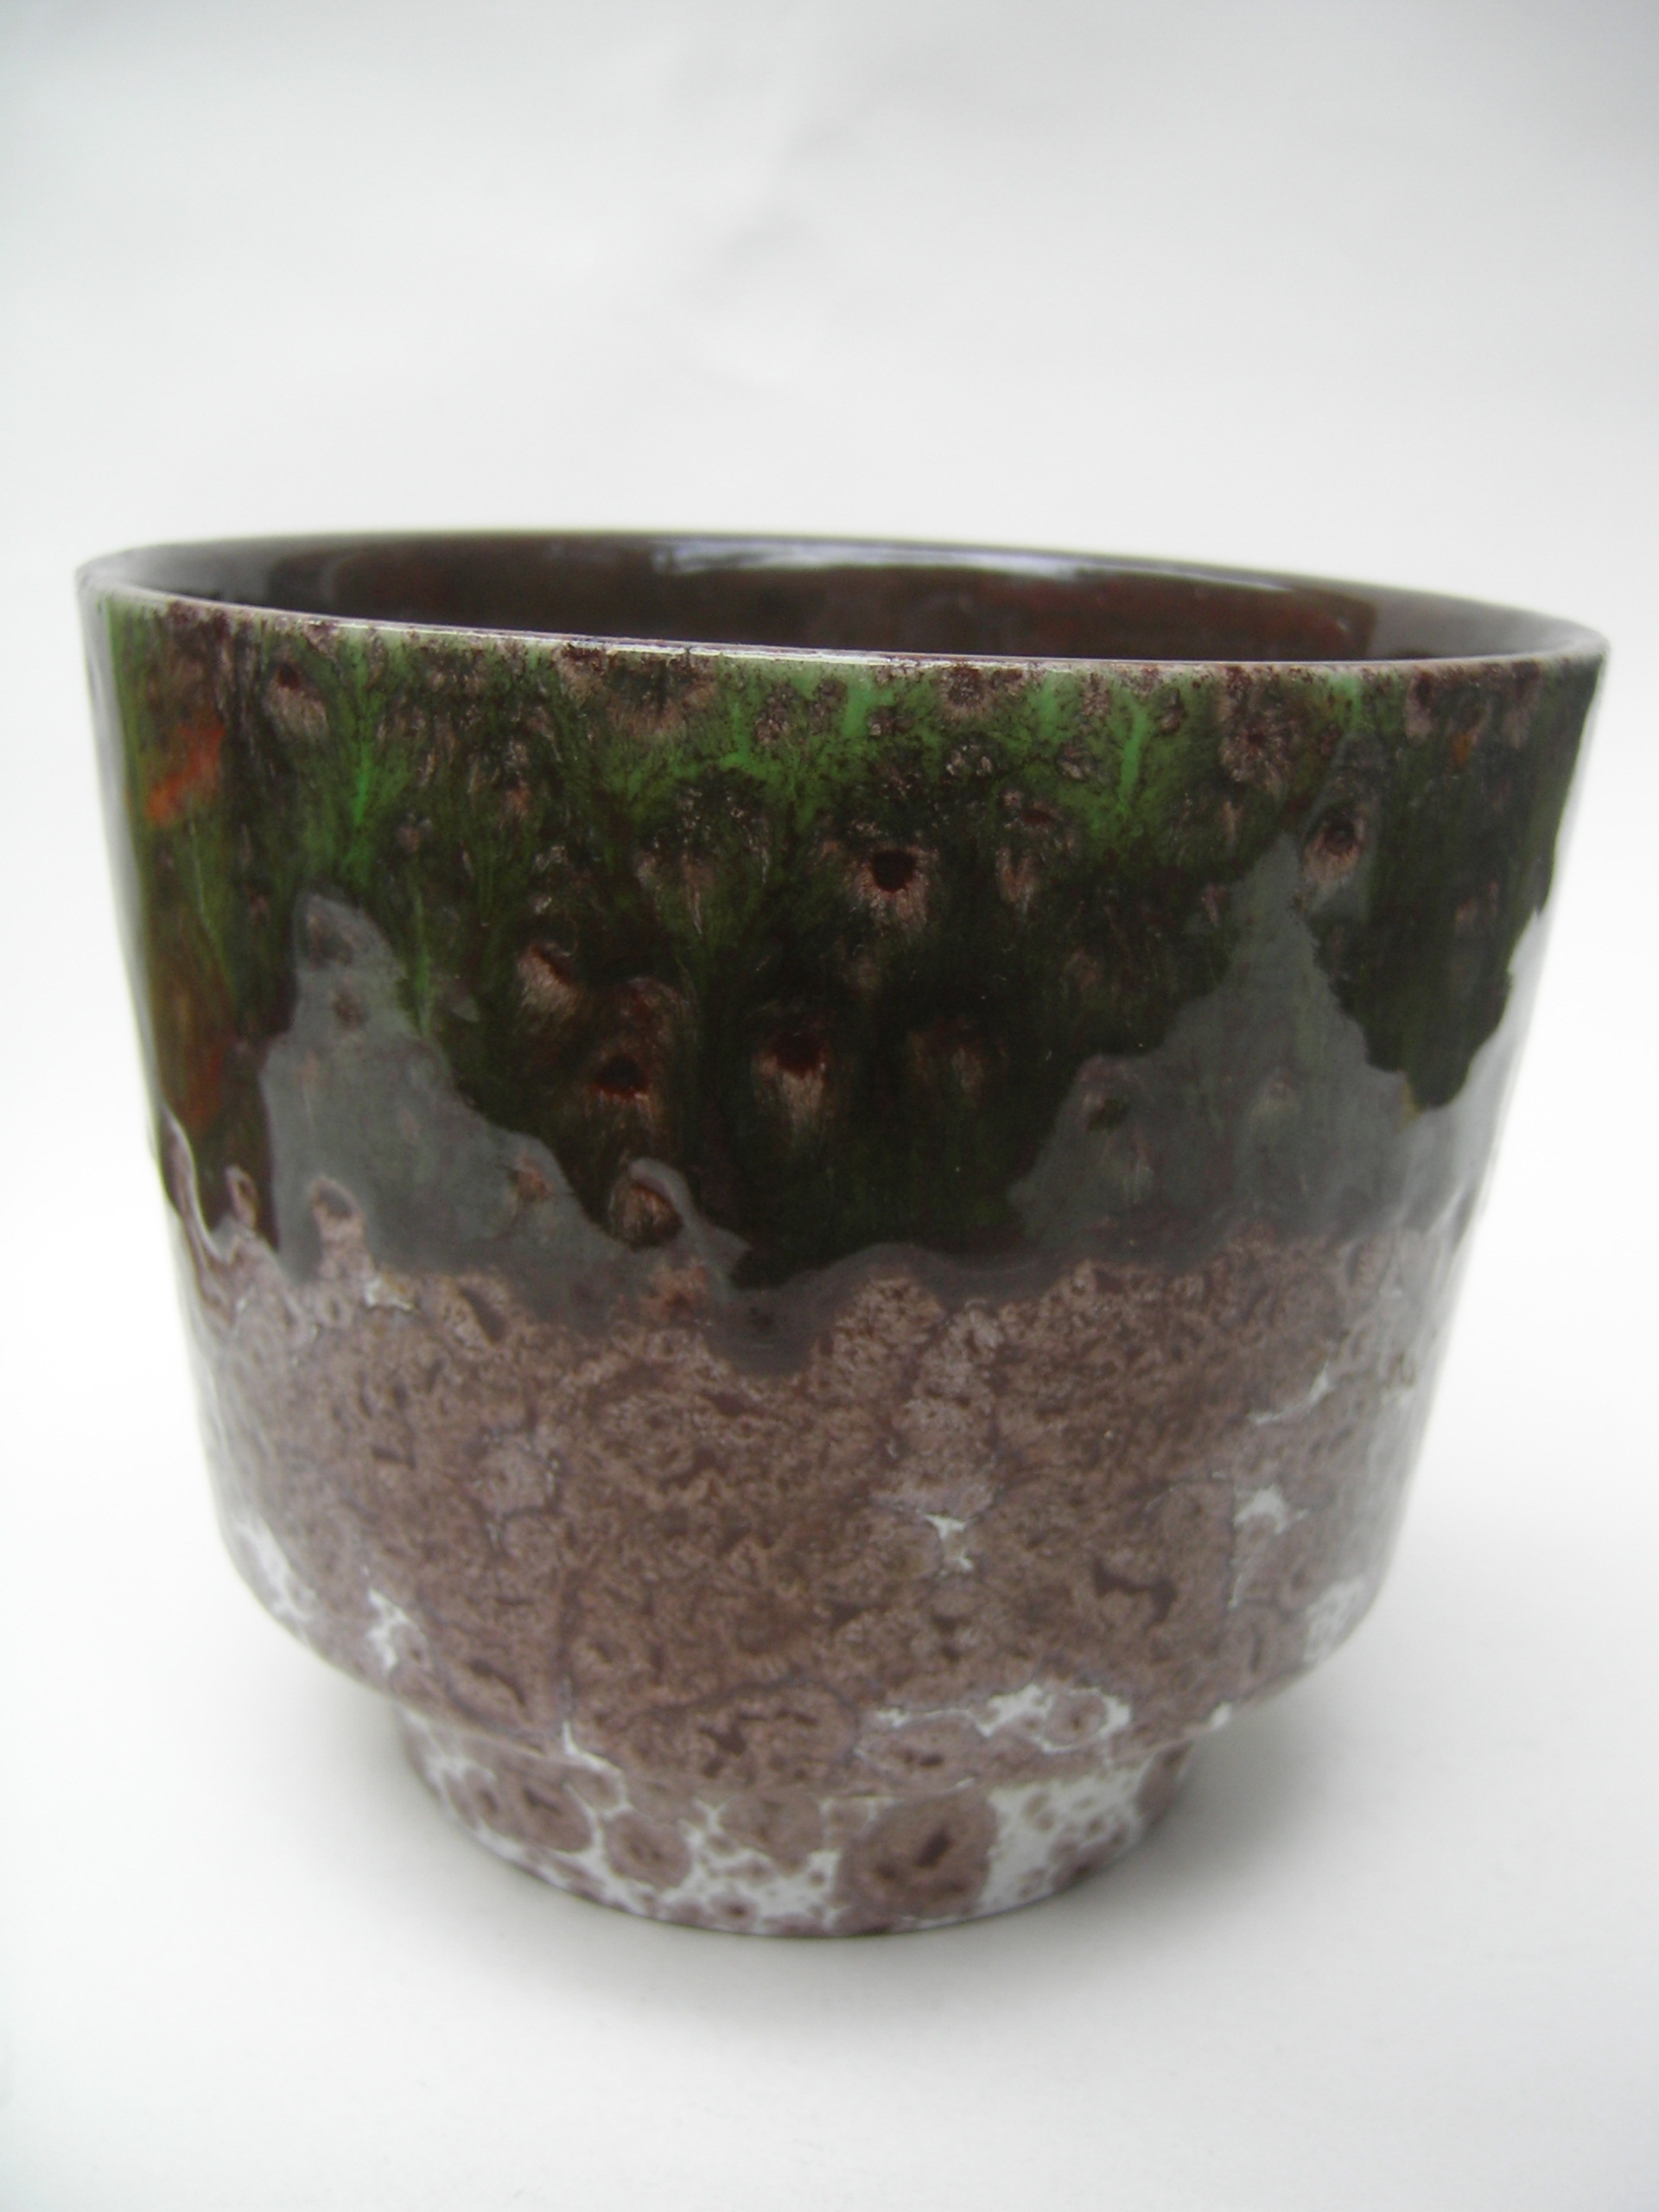 Roth 23-22 Plant Pot West German Green pottery